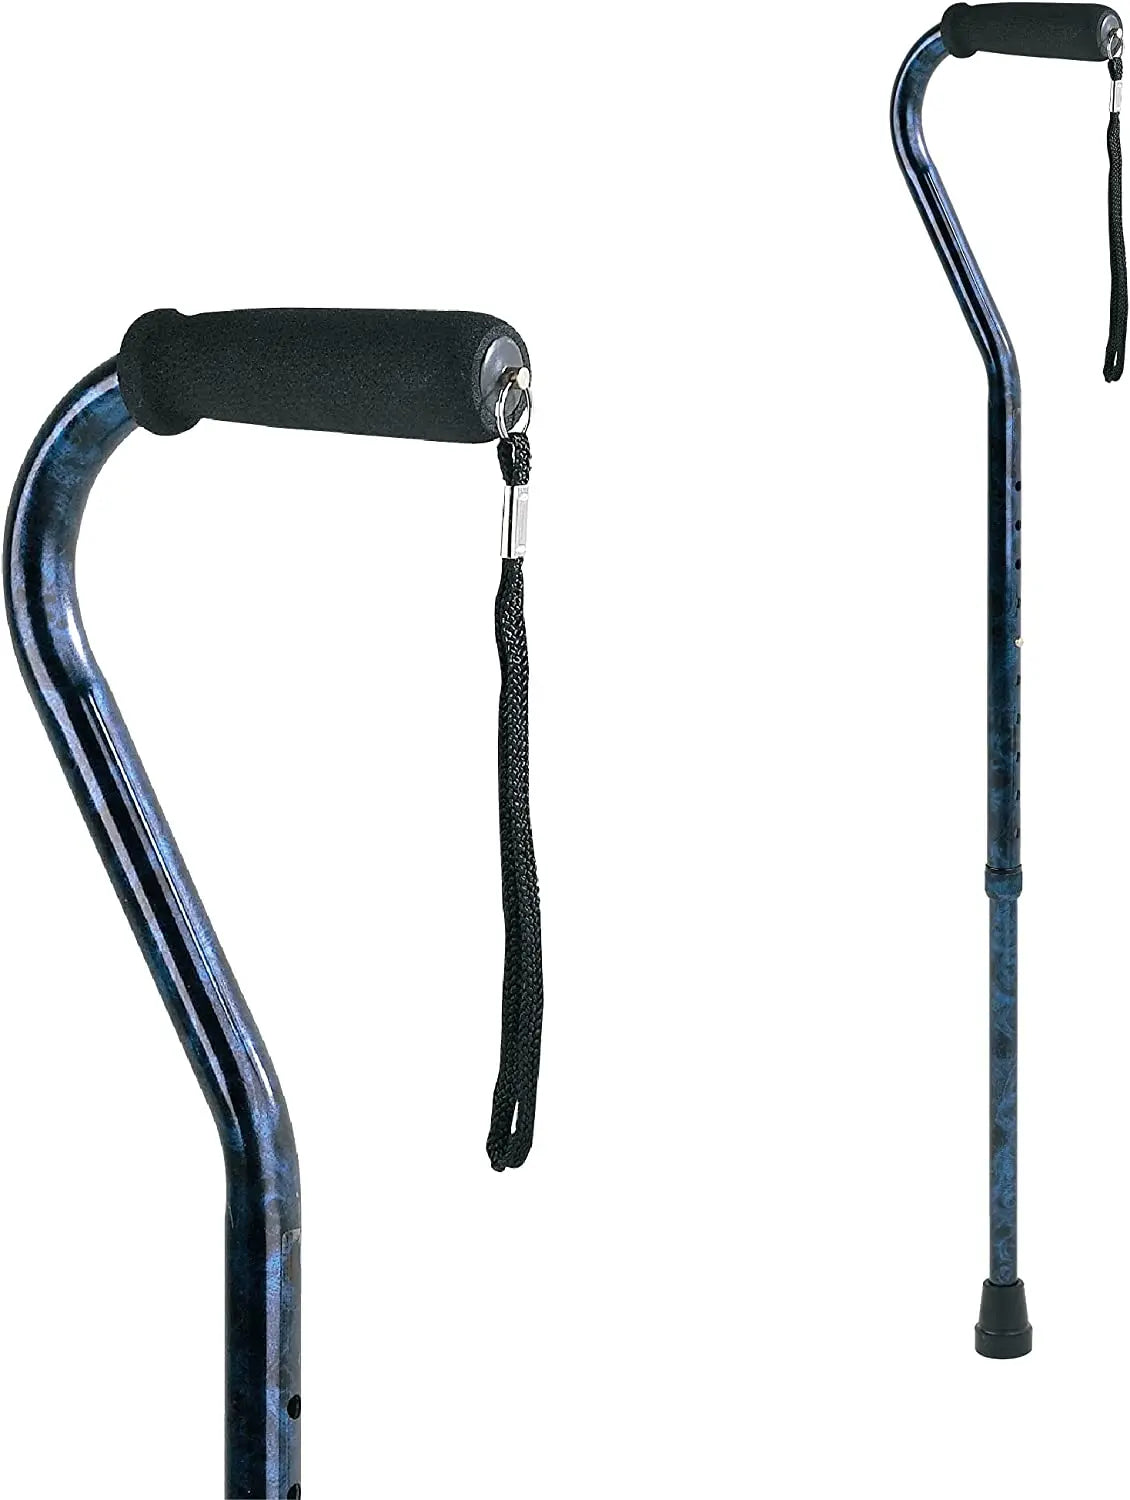 Offset Handle Cane W/Wrist Strap.Height 31-40in. Up To 250lbs Color:Canterbury(Non Ret) - Ea/1